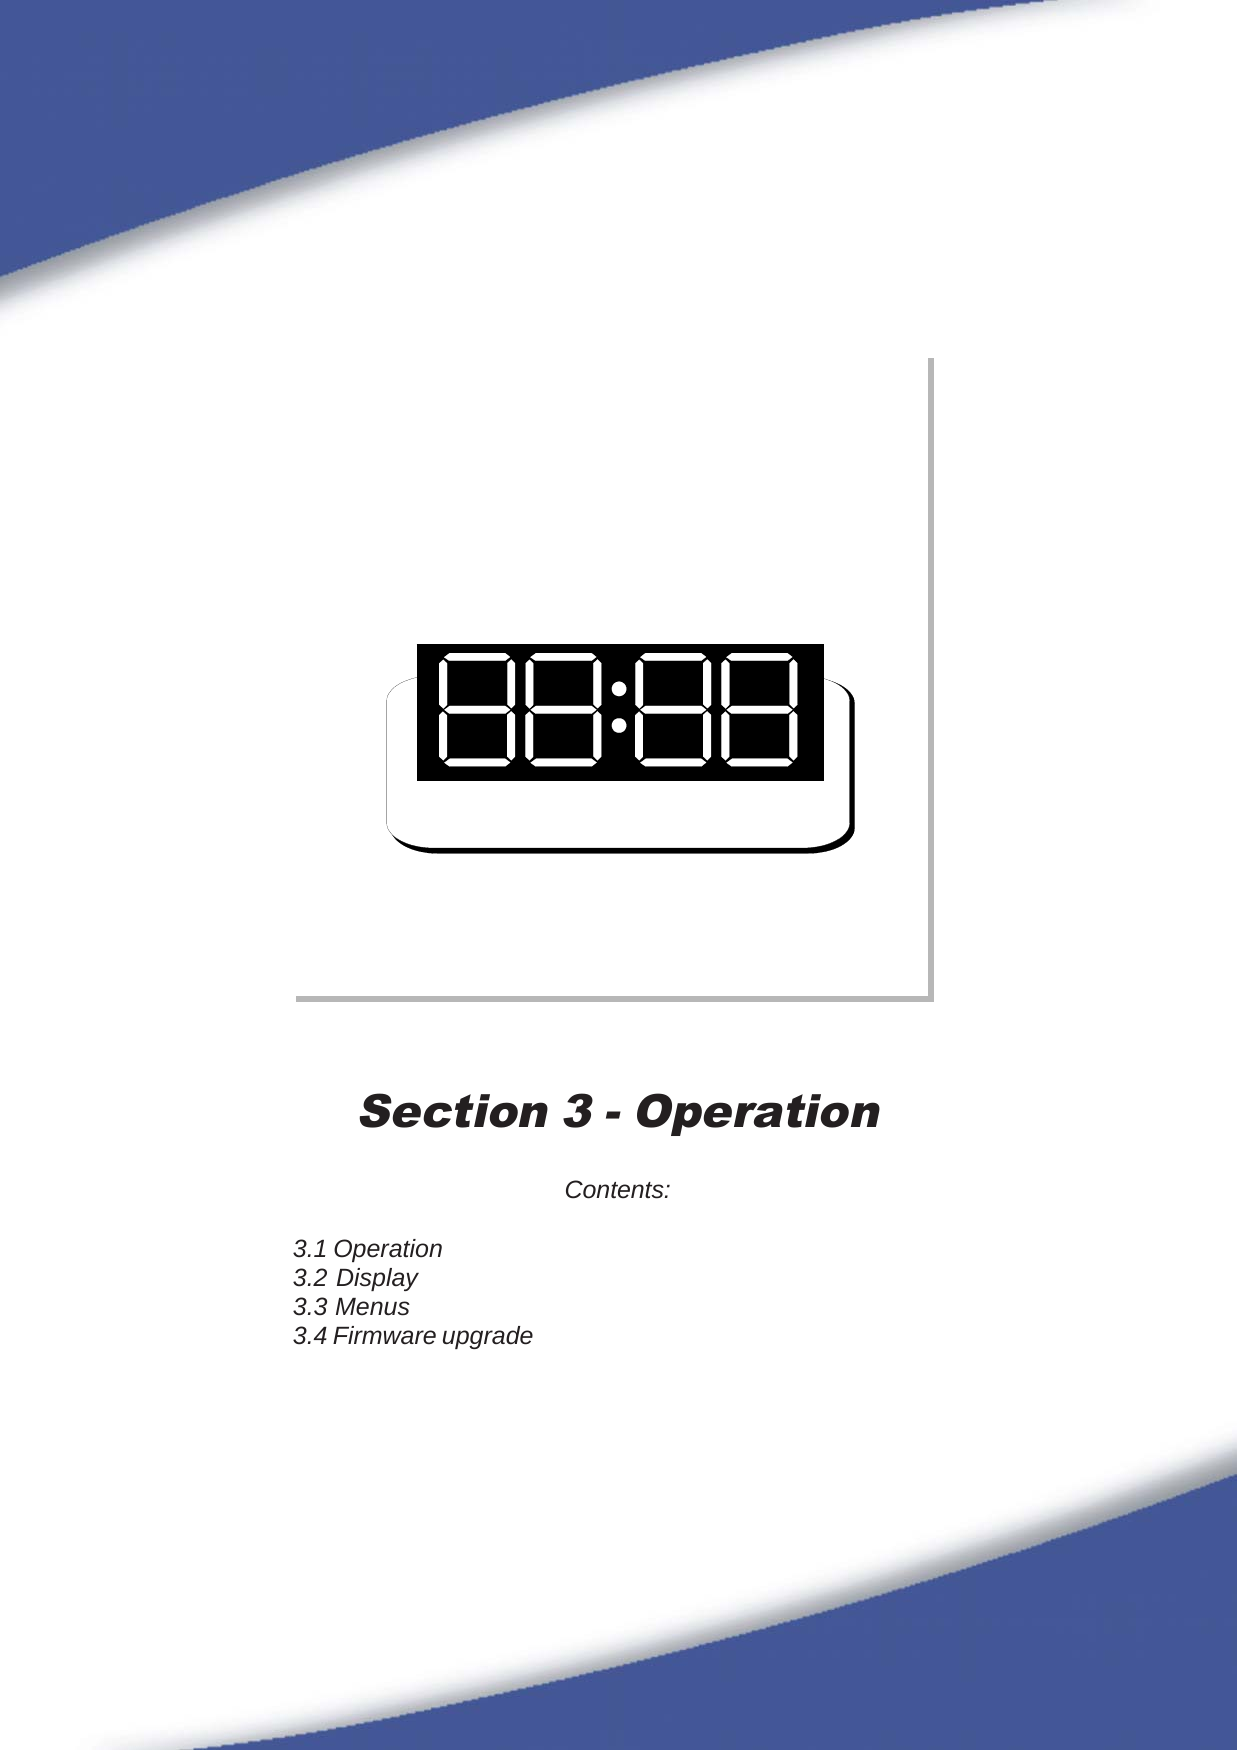 105Section 3 - OperationContents:3.1 Operation3.2 Display3.3 Menus3.4 Firmware upgrade